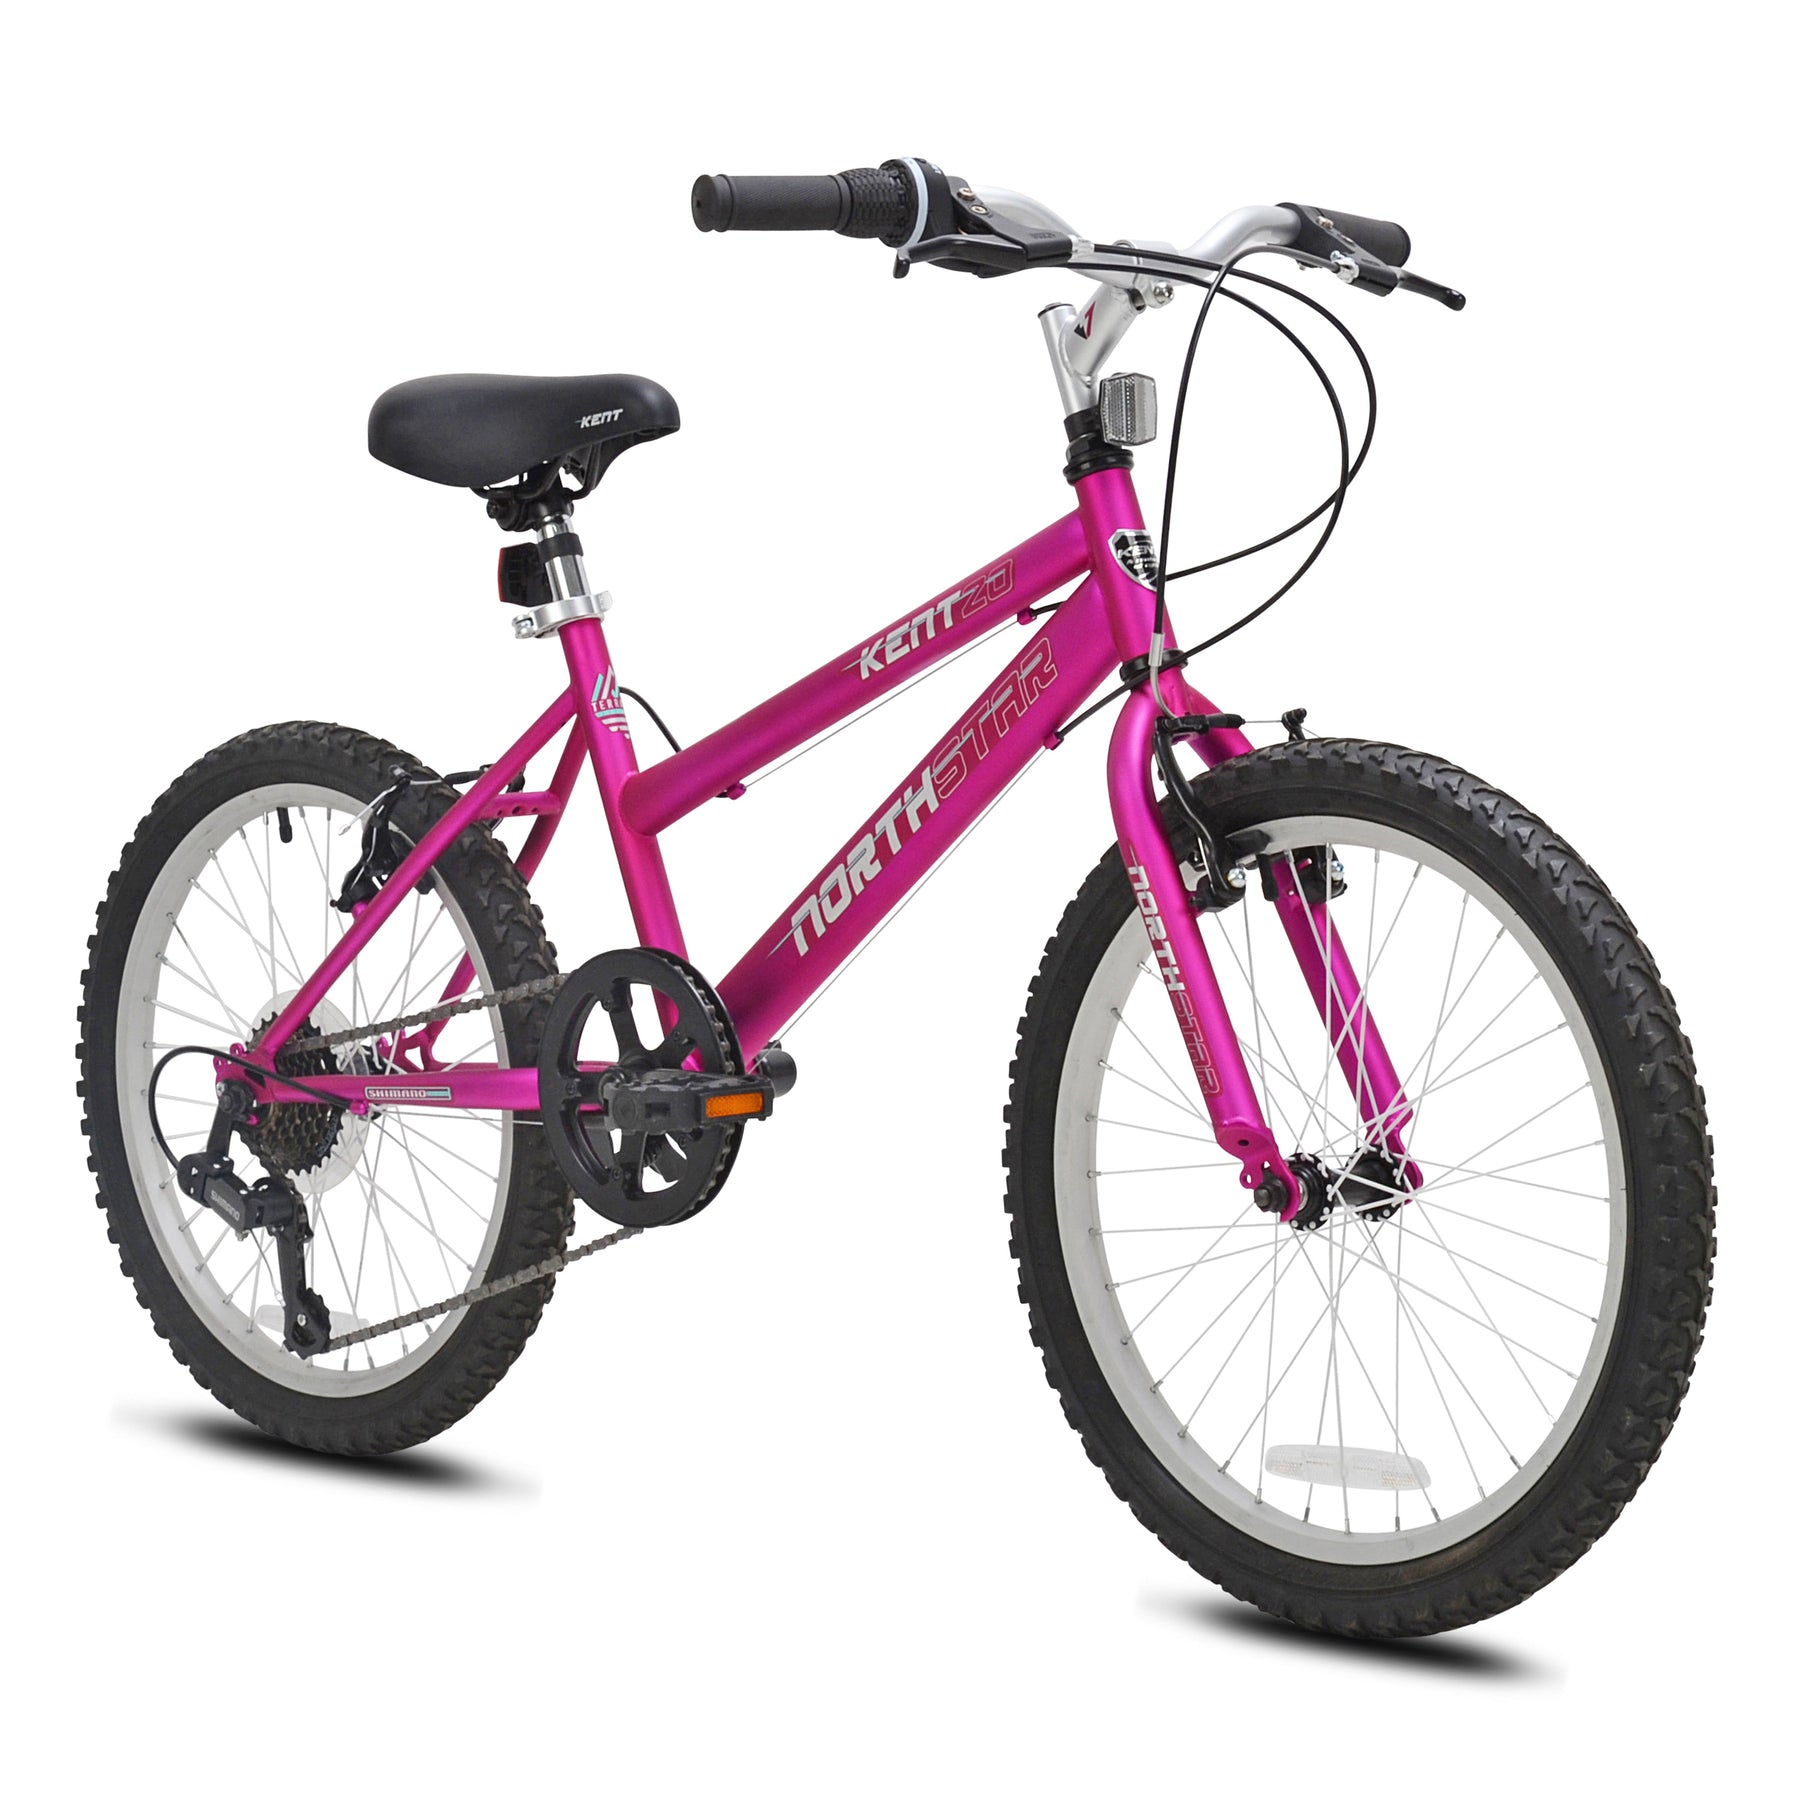 20" Kent Northstar | Mountain Bike for Kids Ages 7-13